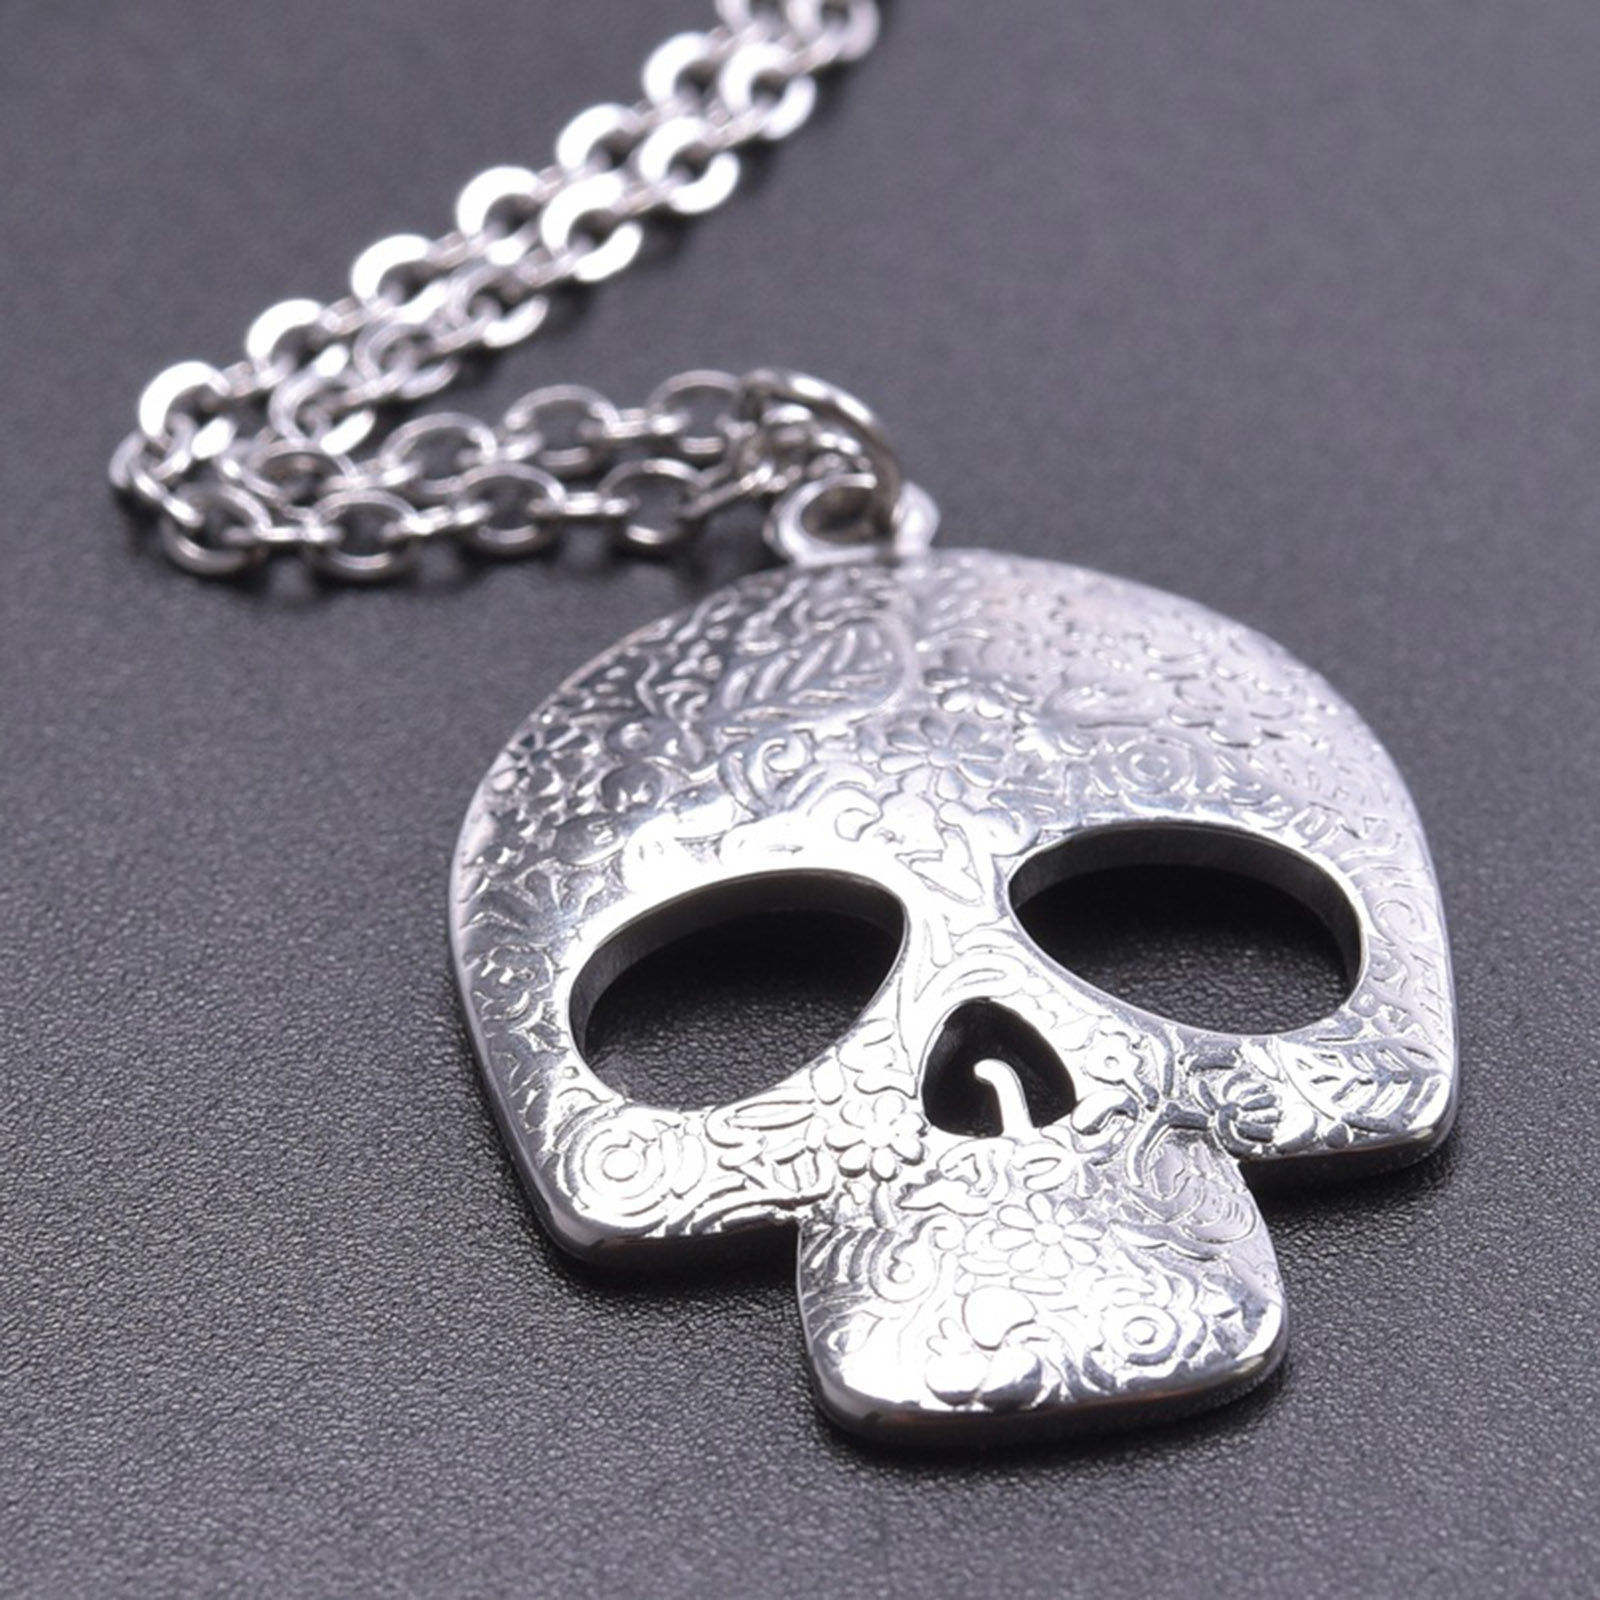 Picture of Stainless Steel Halloween Link Cable Chain Necklace Silver Tone Skull Carved Pattern Hollow 50cm(19 5/8") long, 1 Piece